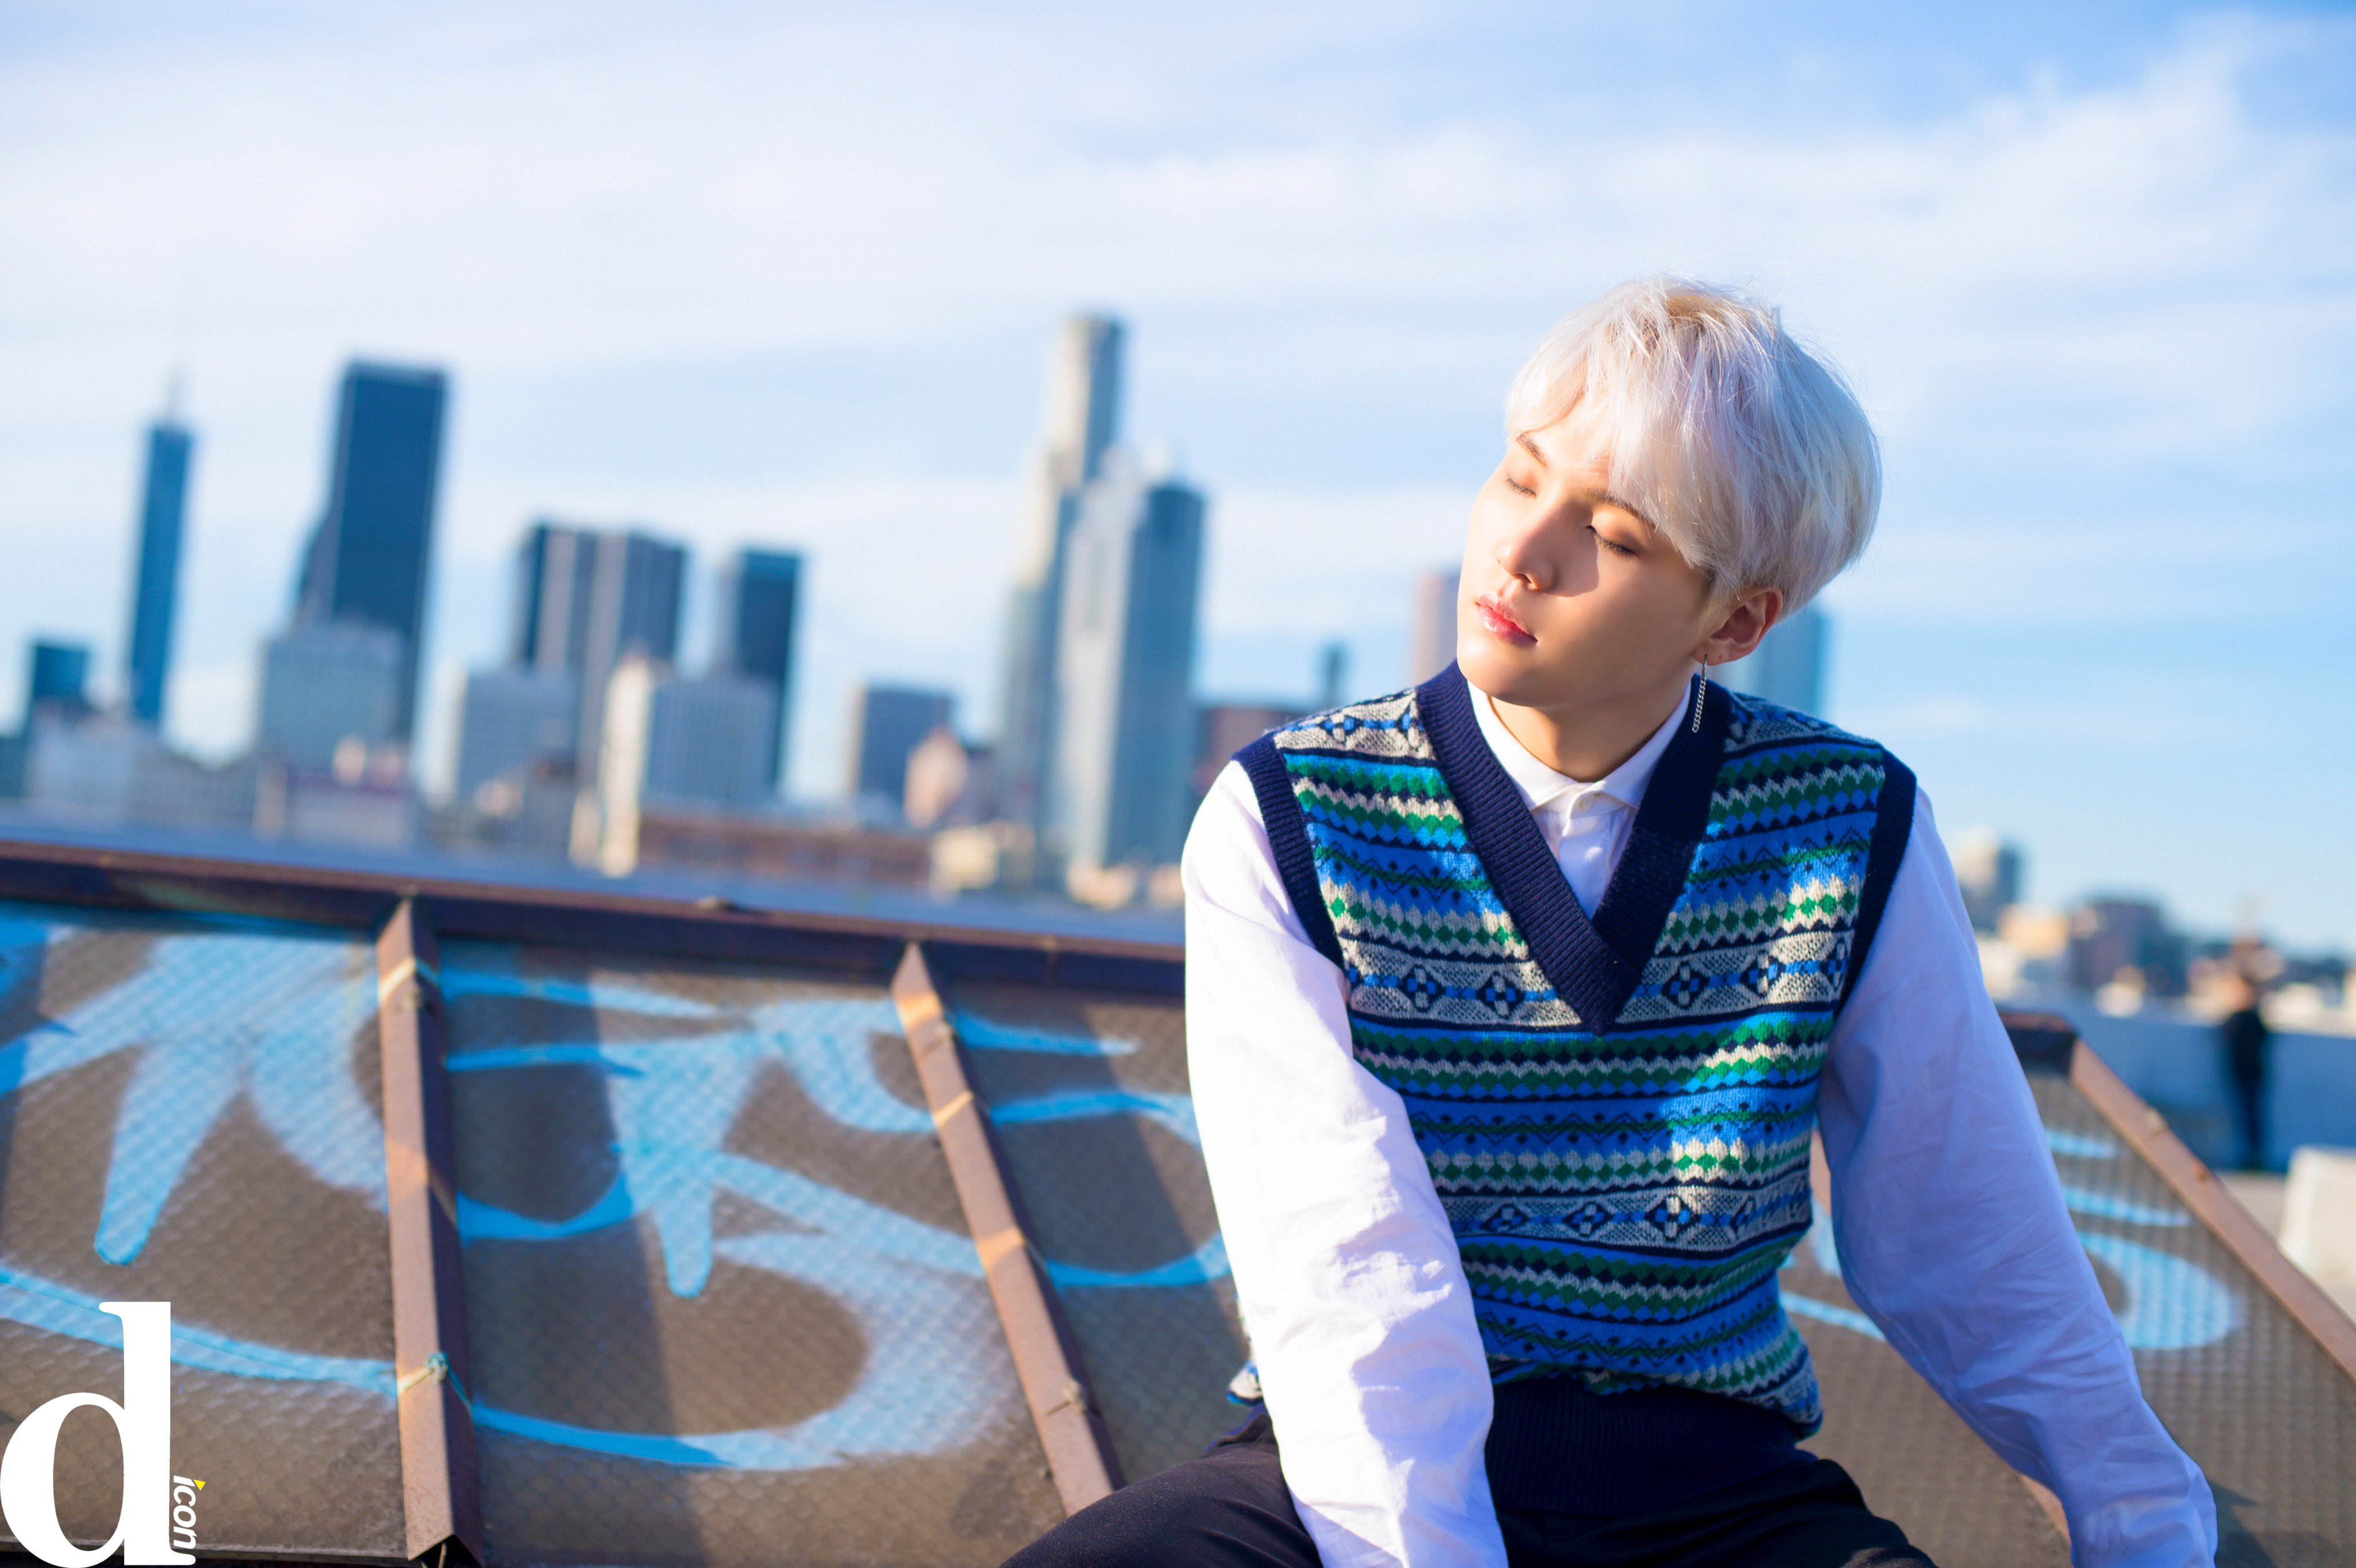 [Picture/Video] BTS’ Suga – D-icon by Dispatch [180309]